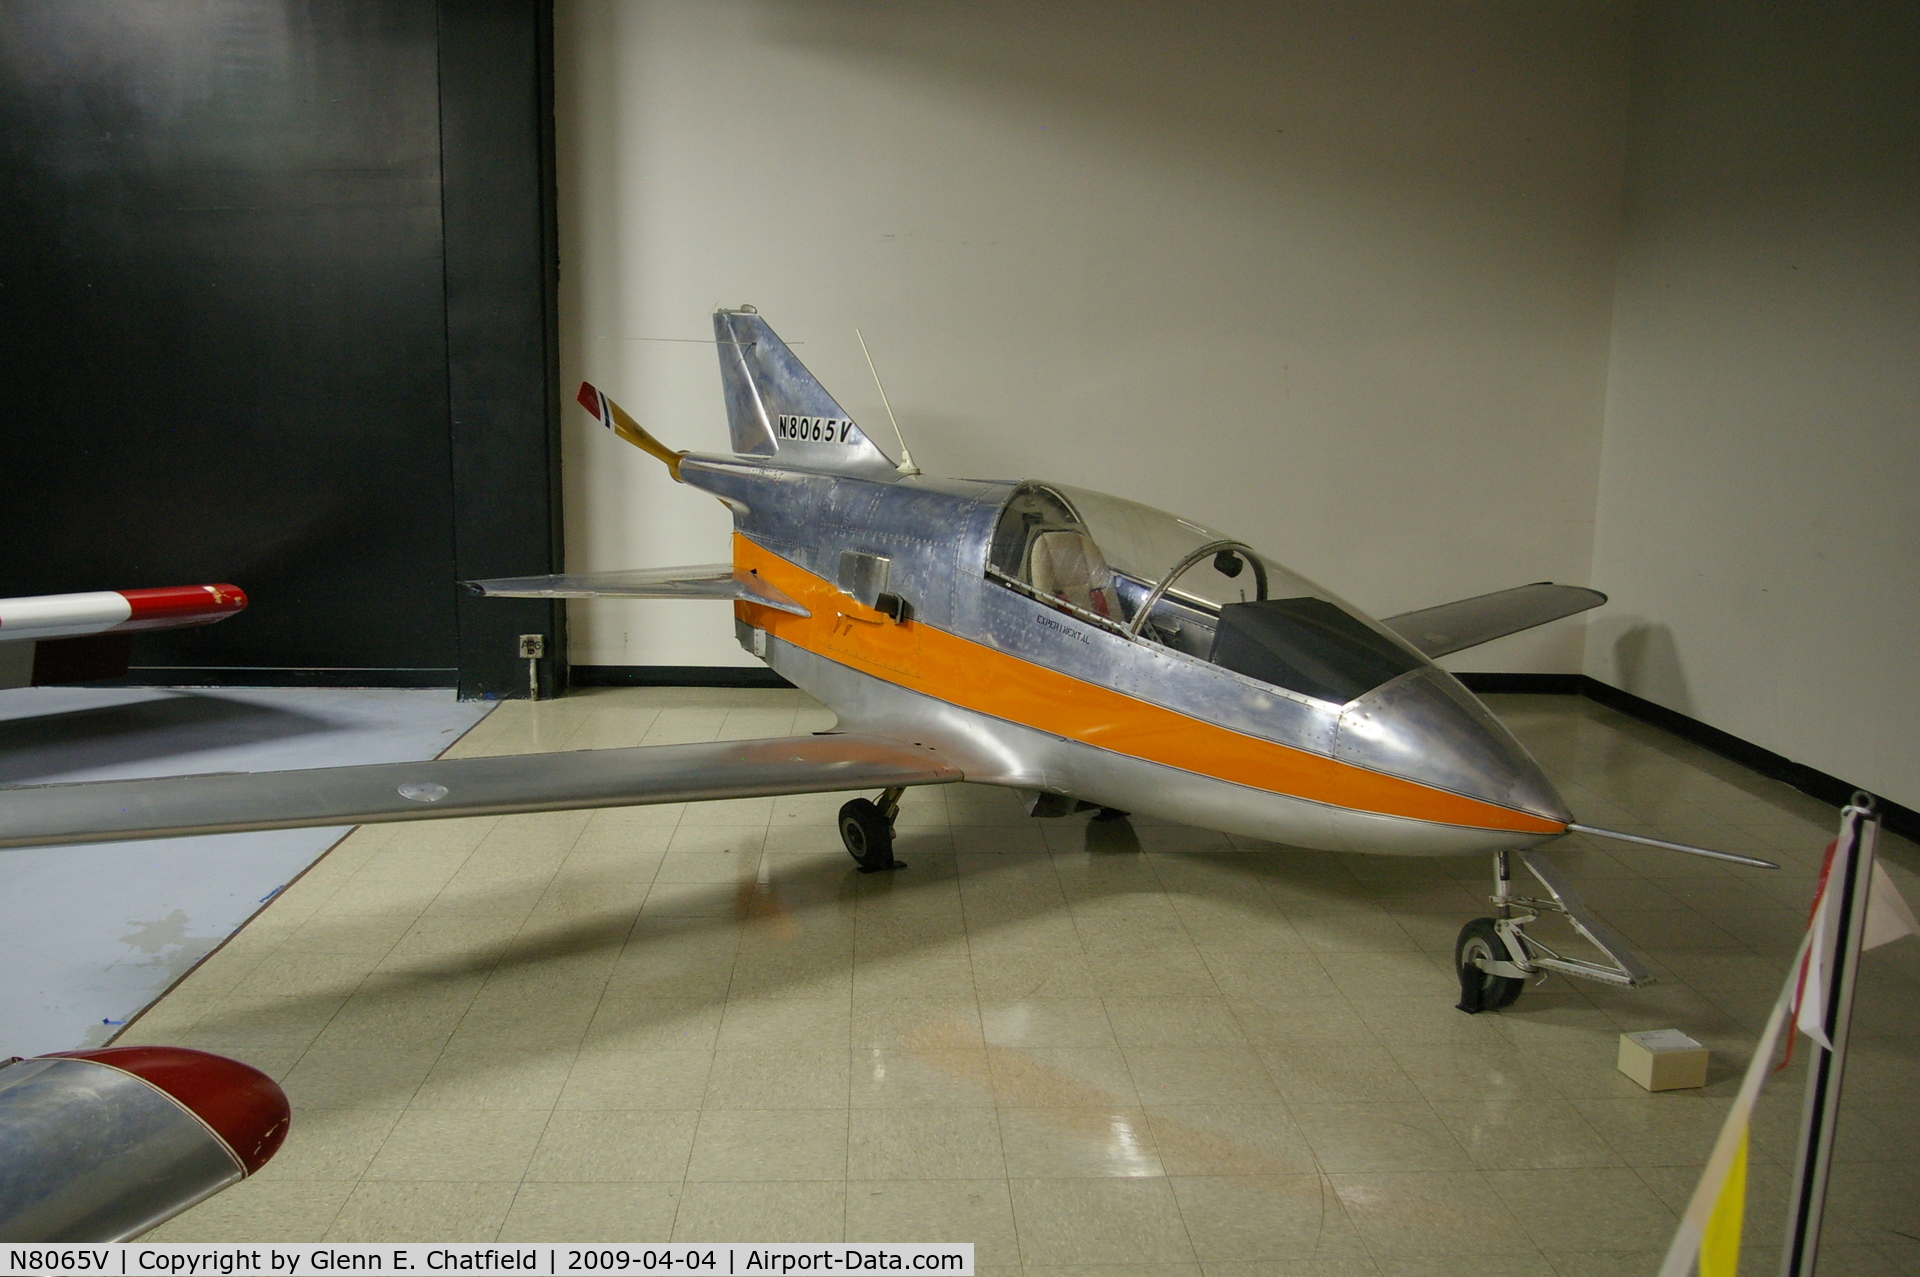 N8065V, 1980 Bede BD-5B C/N 673, At the Science Museum of Oklahoma in Oklahoma City